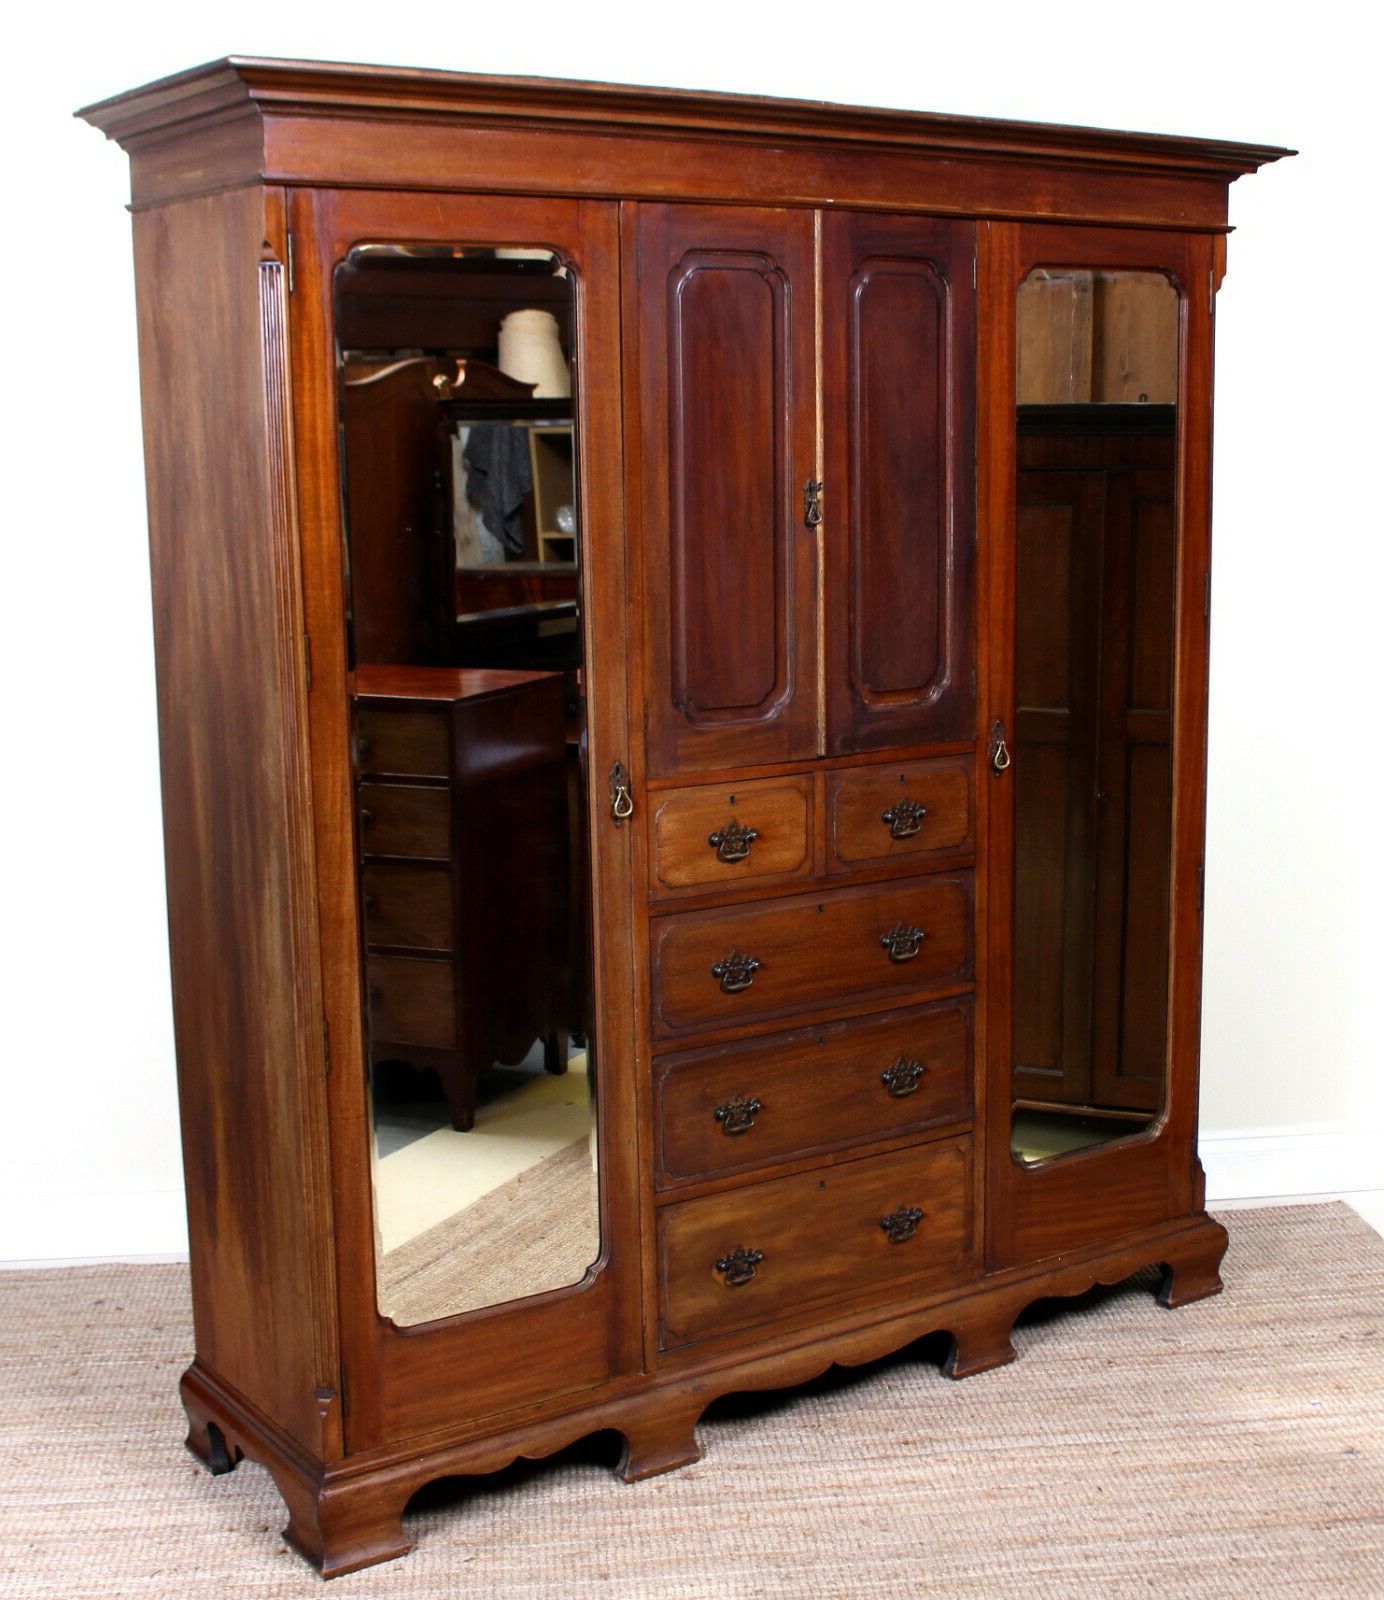 Antique Wardrobe Triple Compactum Mahogany Mirrored – Harper Baxter With Regard To Antique Triple Wardrobes (View 9 of 20)